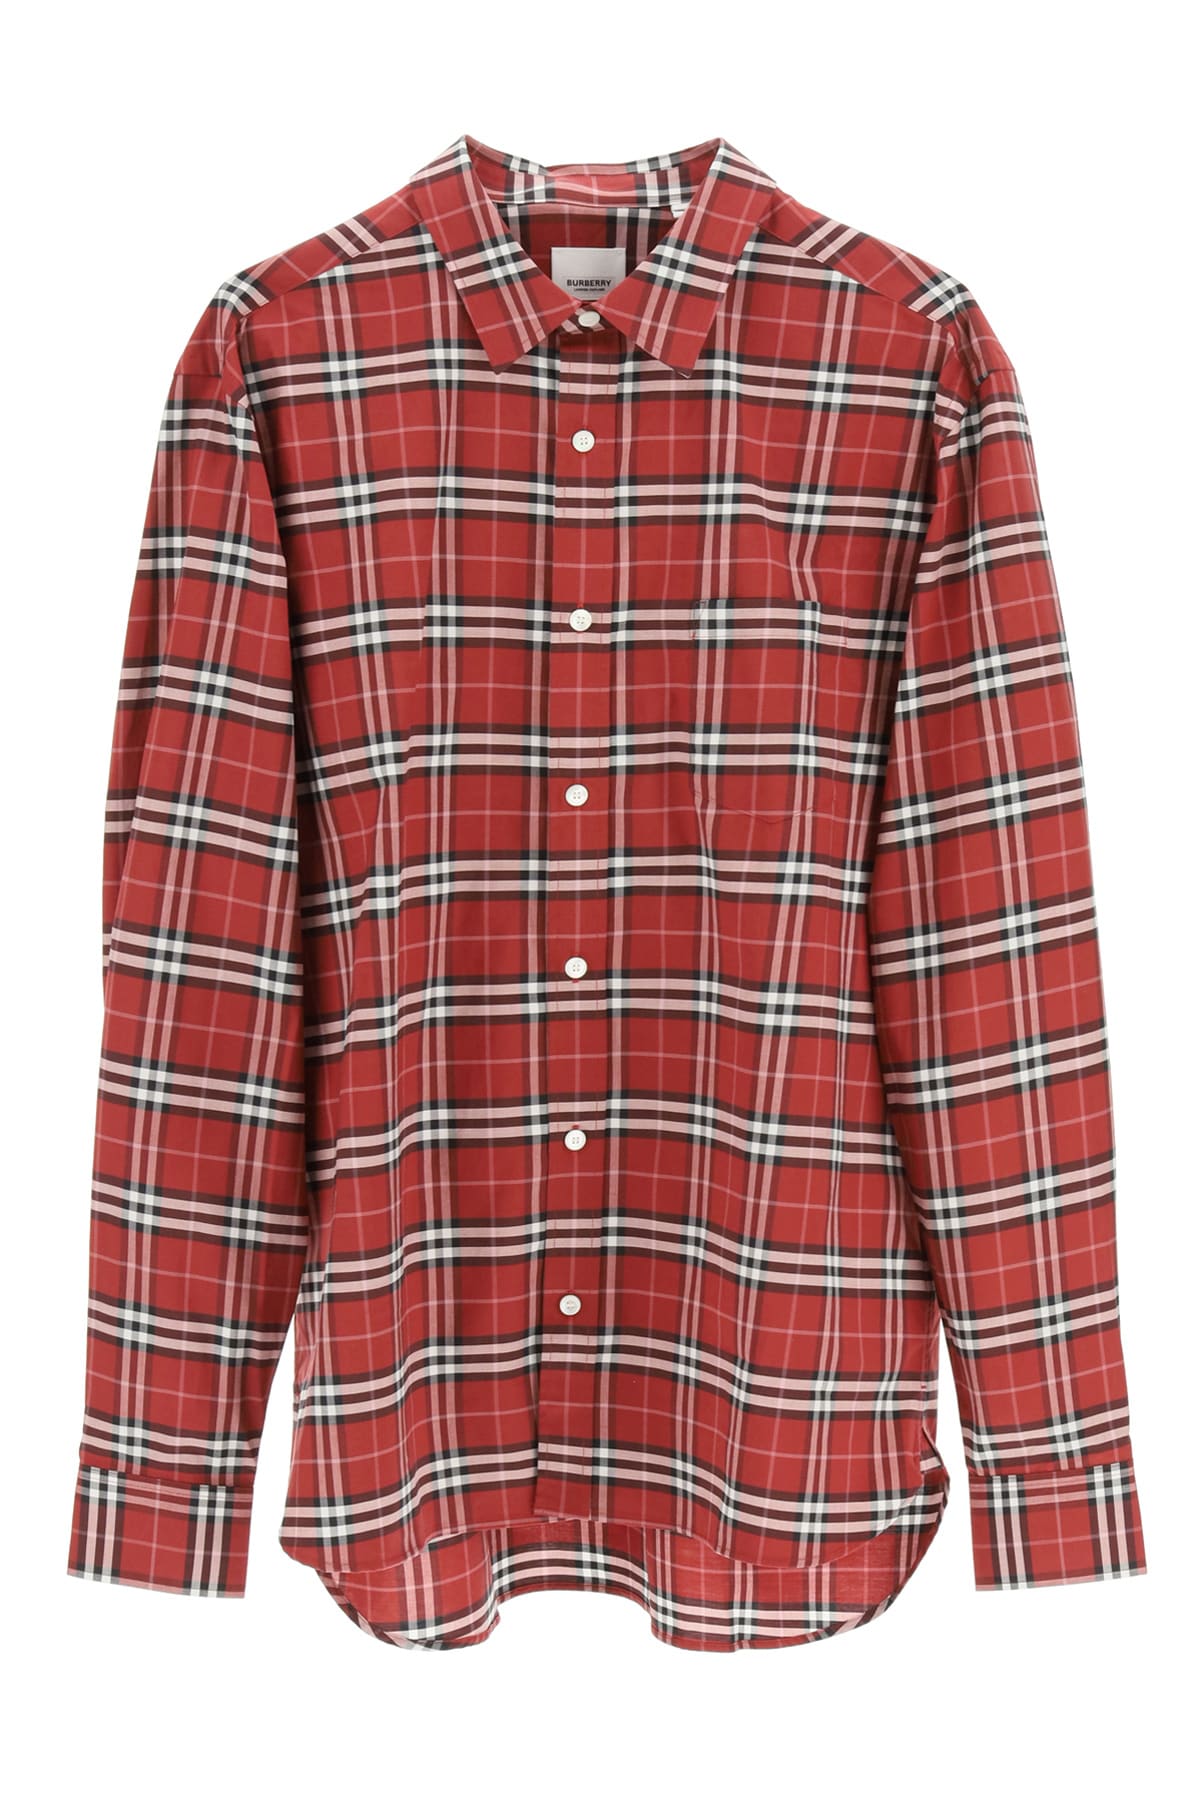 Burberry George Tartan Shirt In Bright Red Ip Check (red)